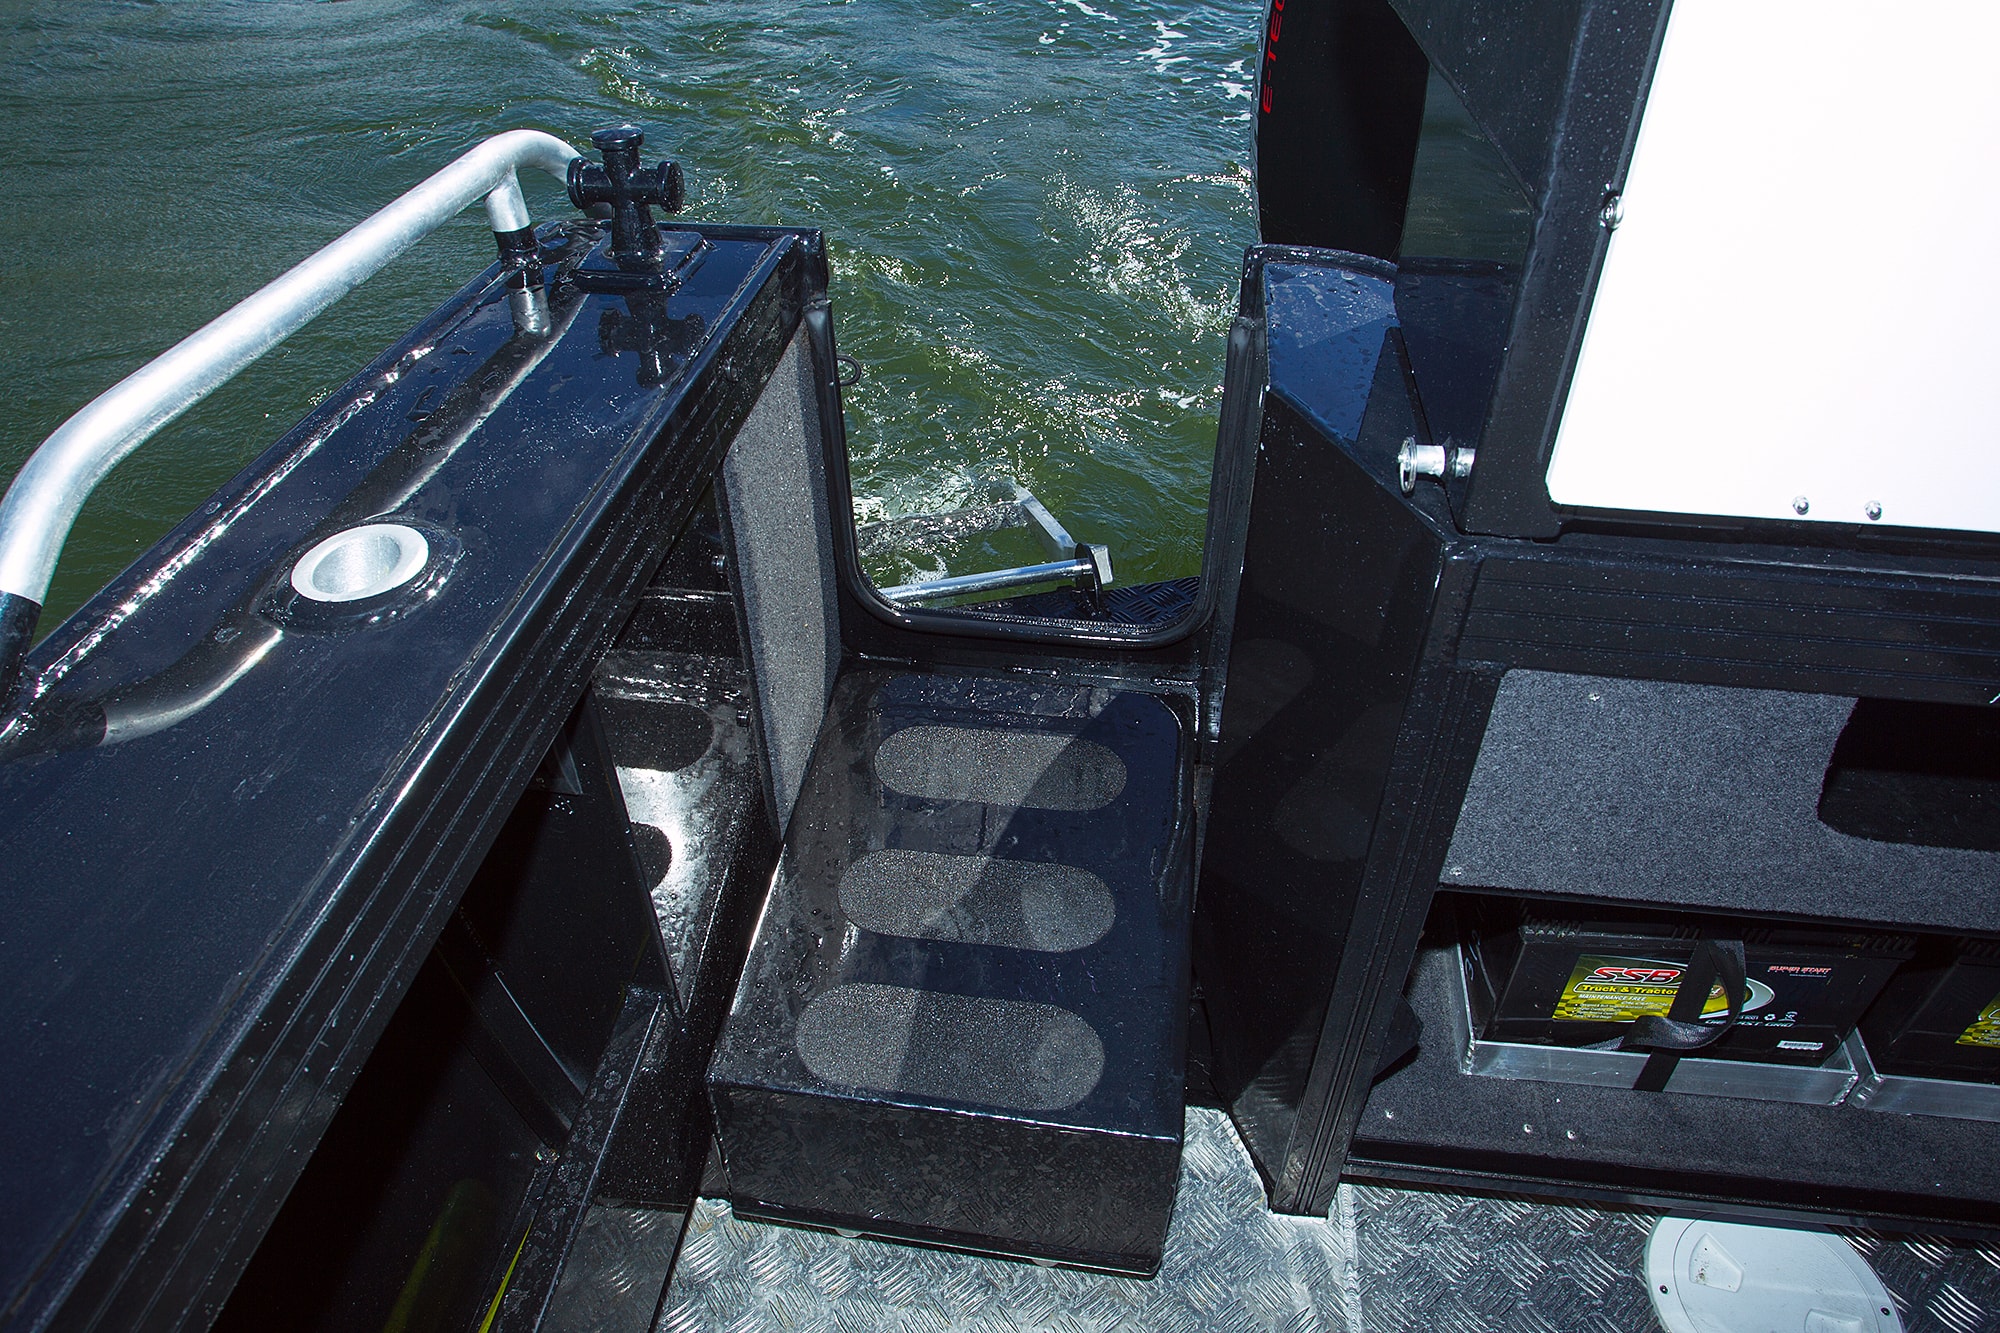 Yellowfin Plate Boats - Why wouldn't you option up to the Deluxe Bait  Station? The fold down hatch opens to 10 tackle trays drawers while the  station also features a fishing reel